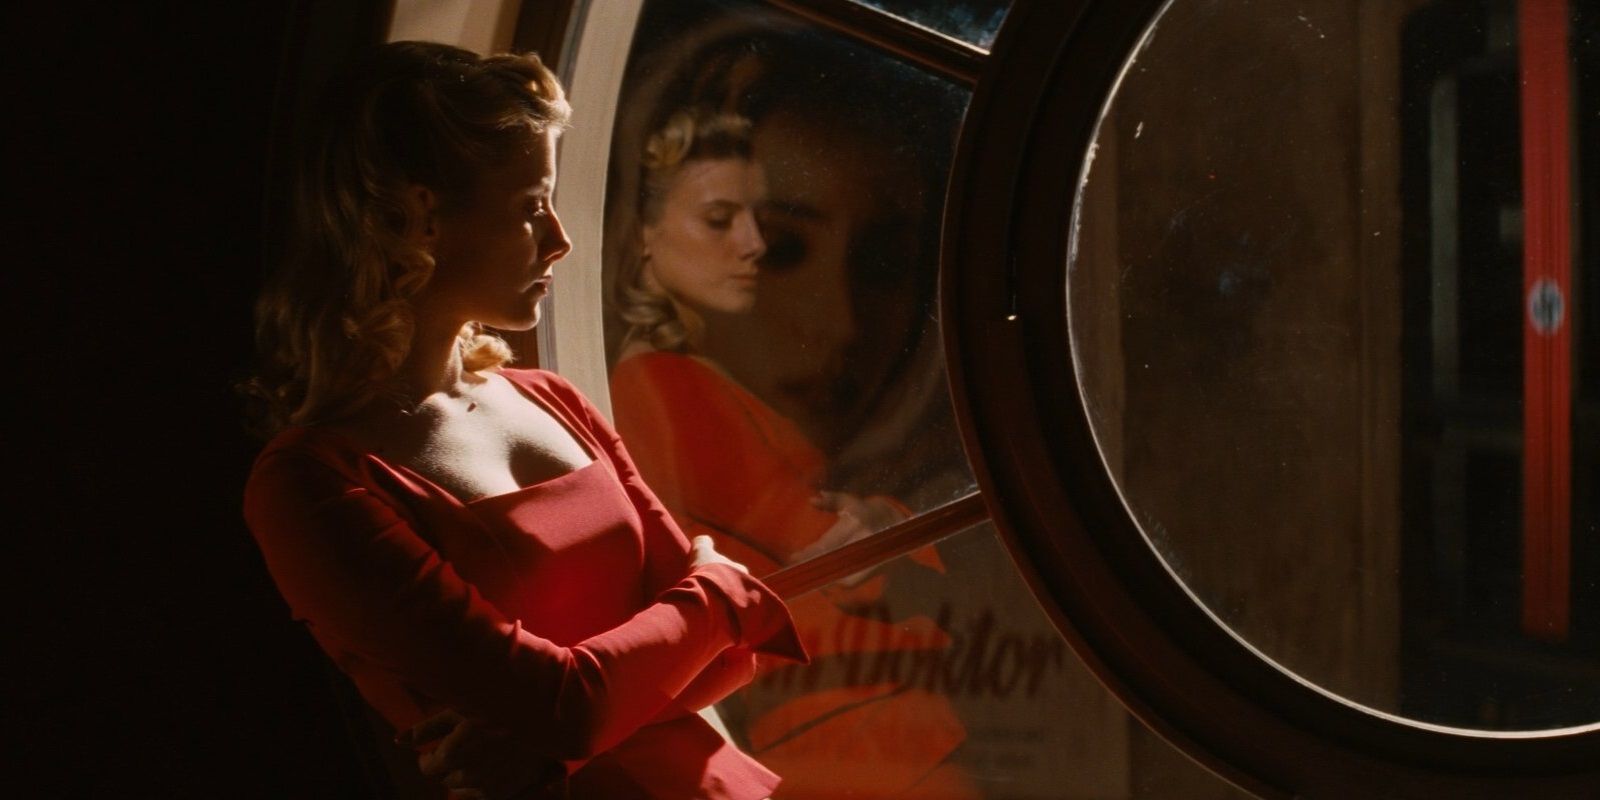 Shosanna standing in a window in Inglourious Basterds